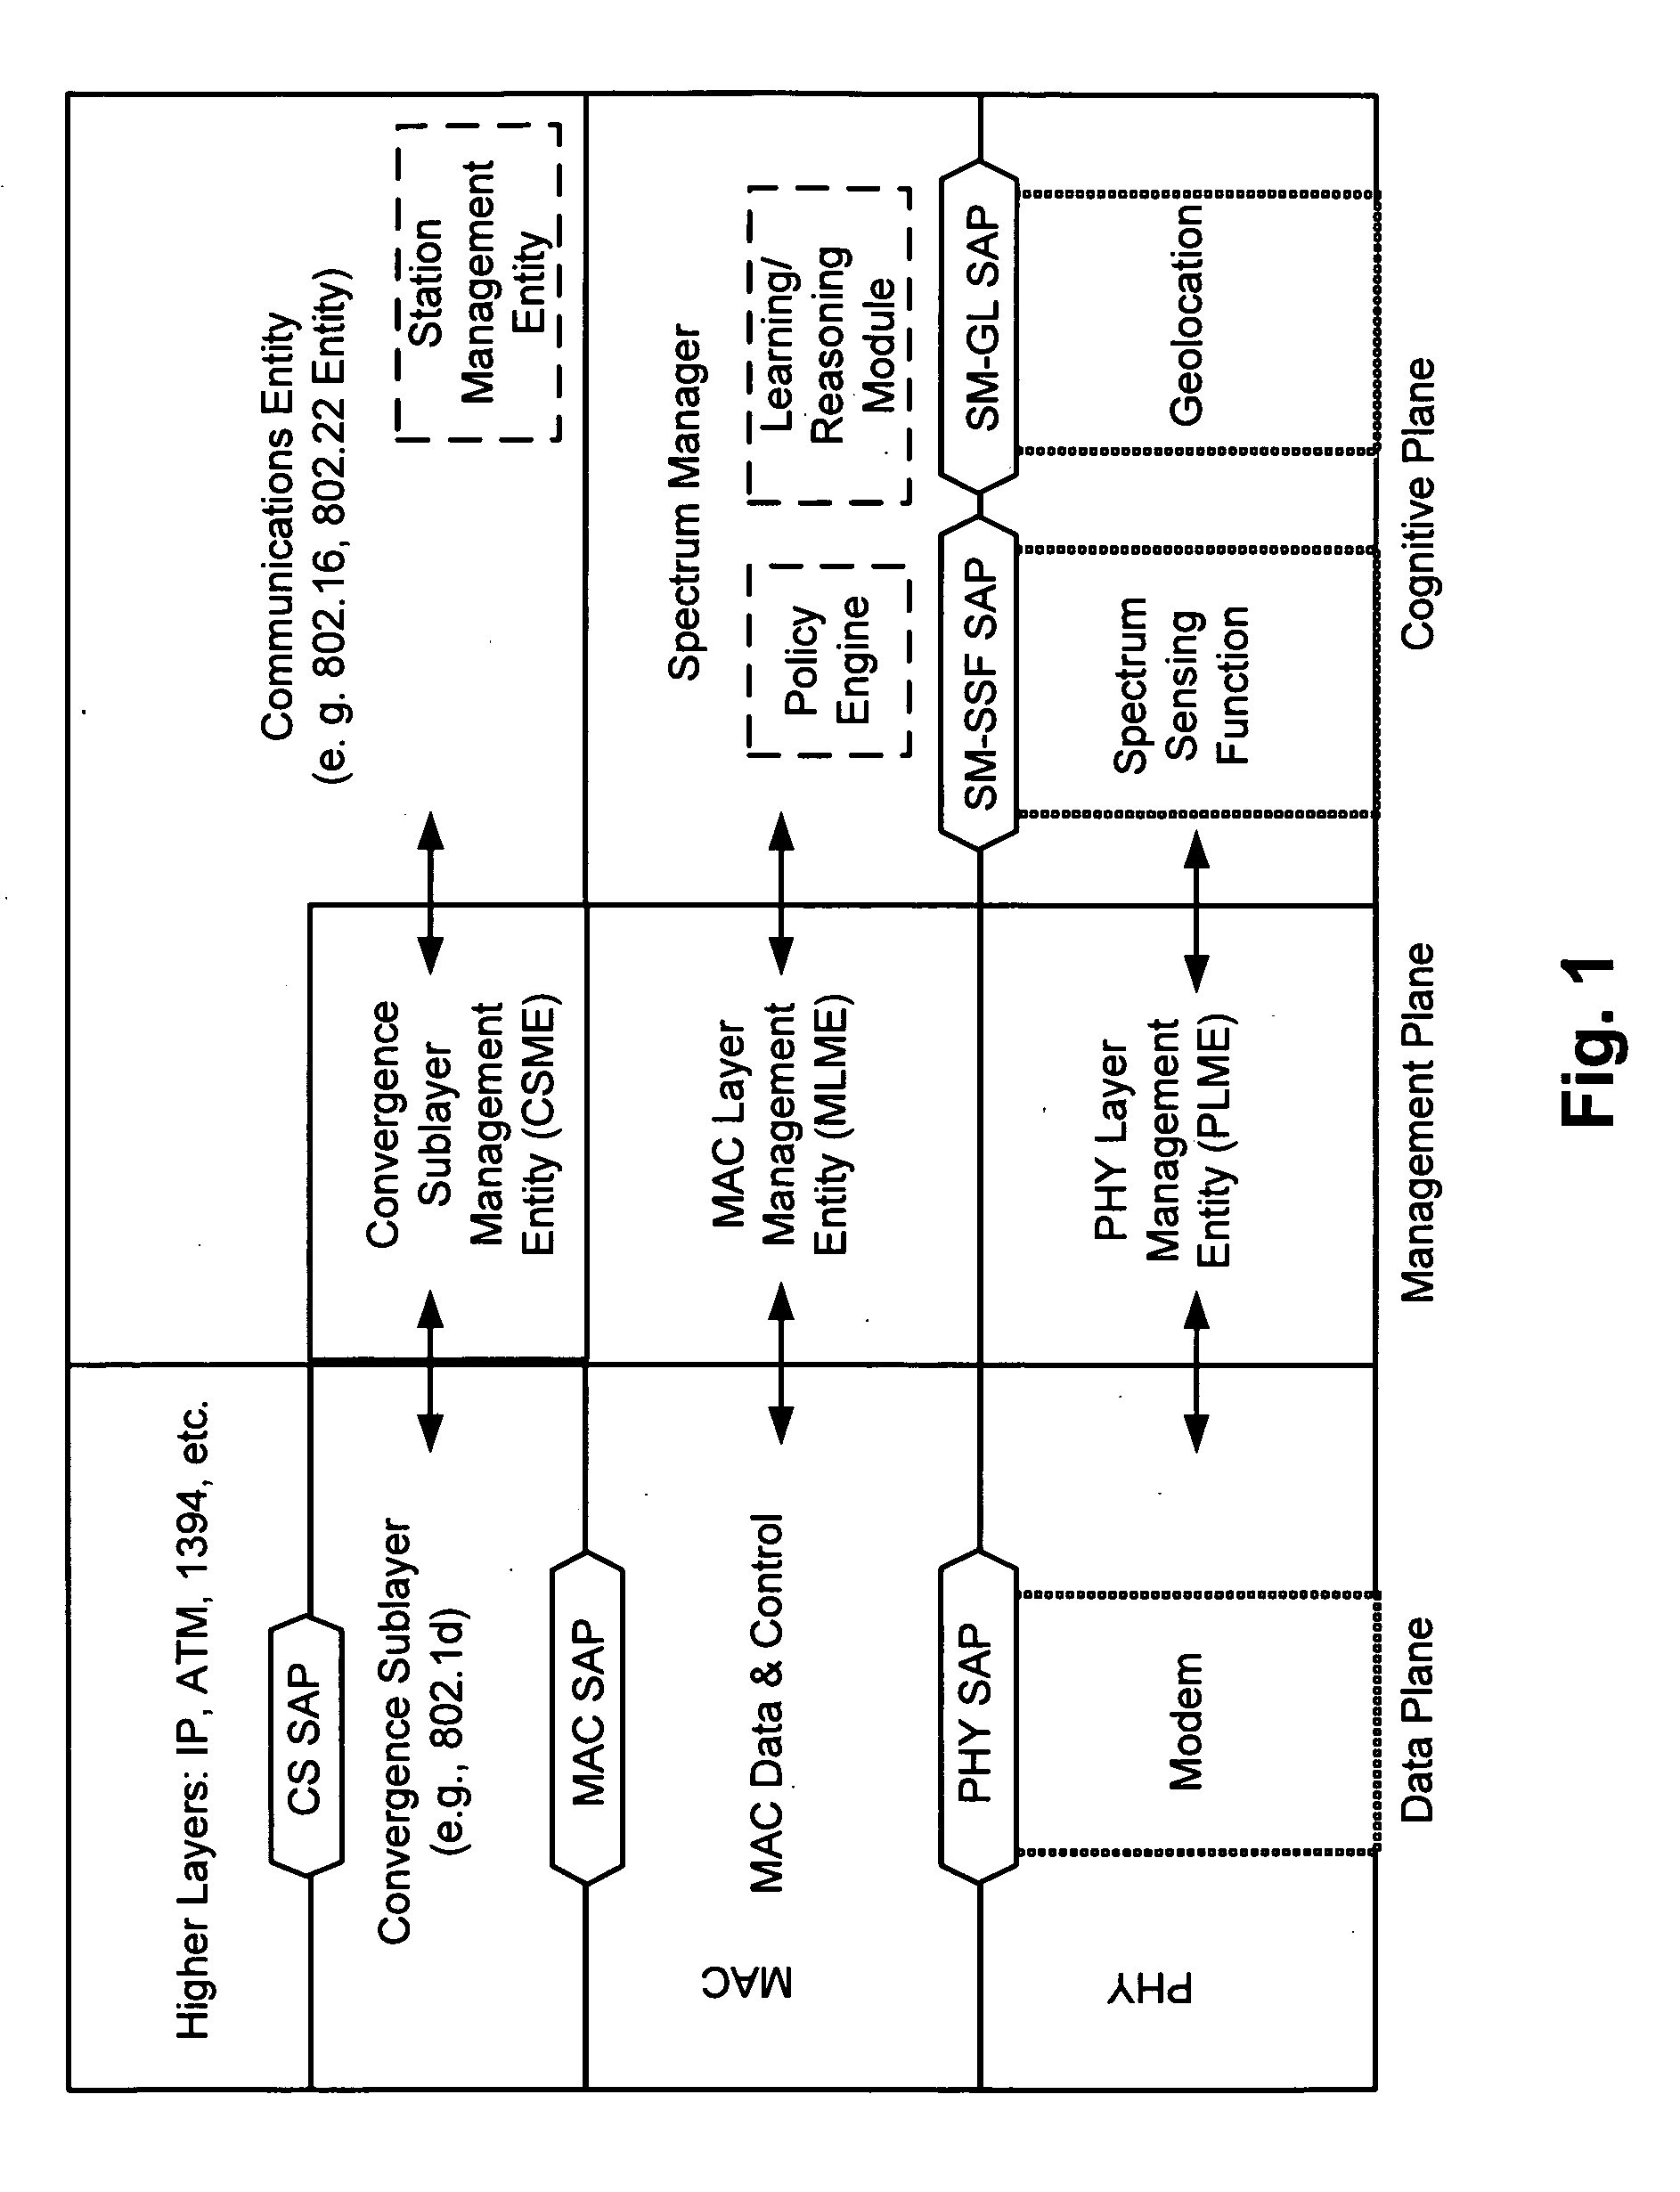 Protocol reference model, security and inter-operability in a cognitive communications system